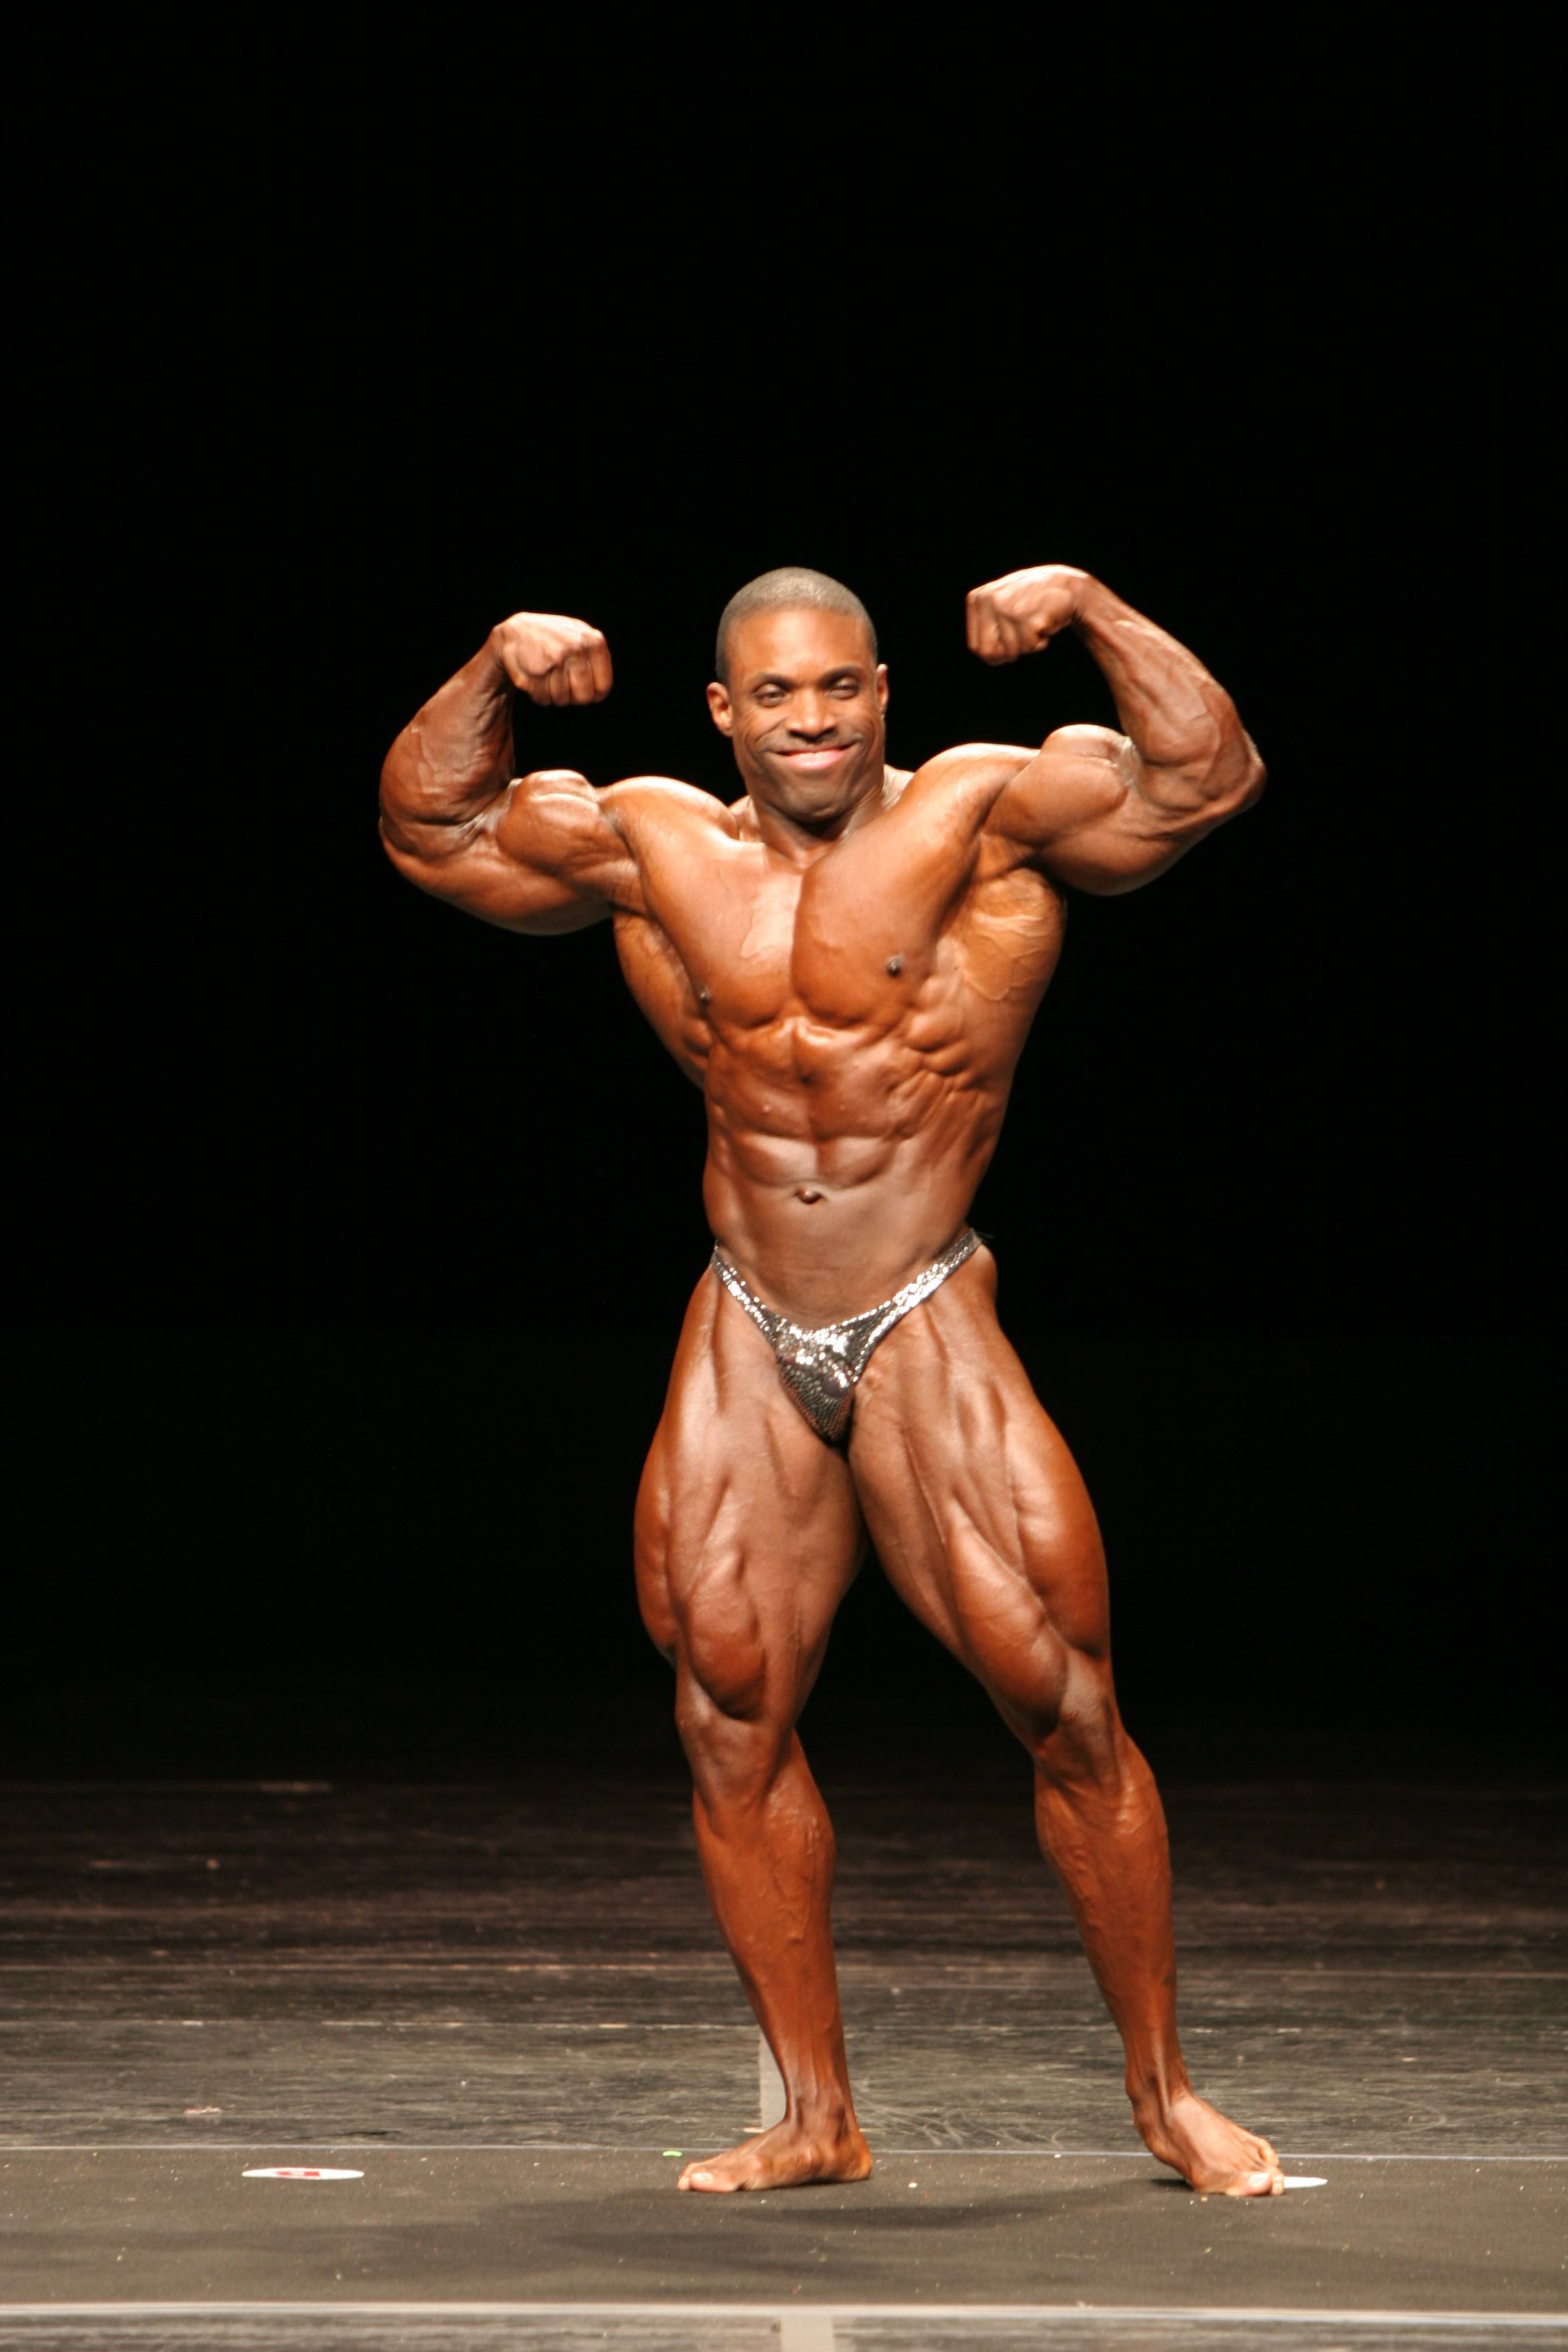 Melvin anthony - greatest physiques